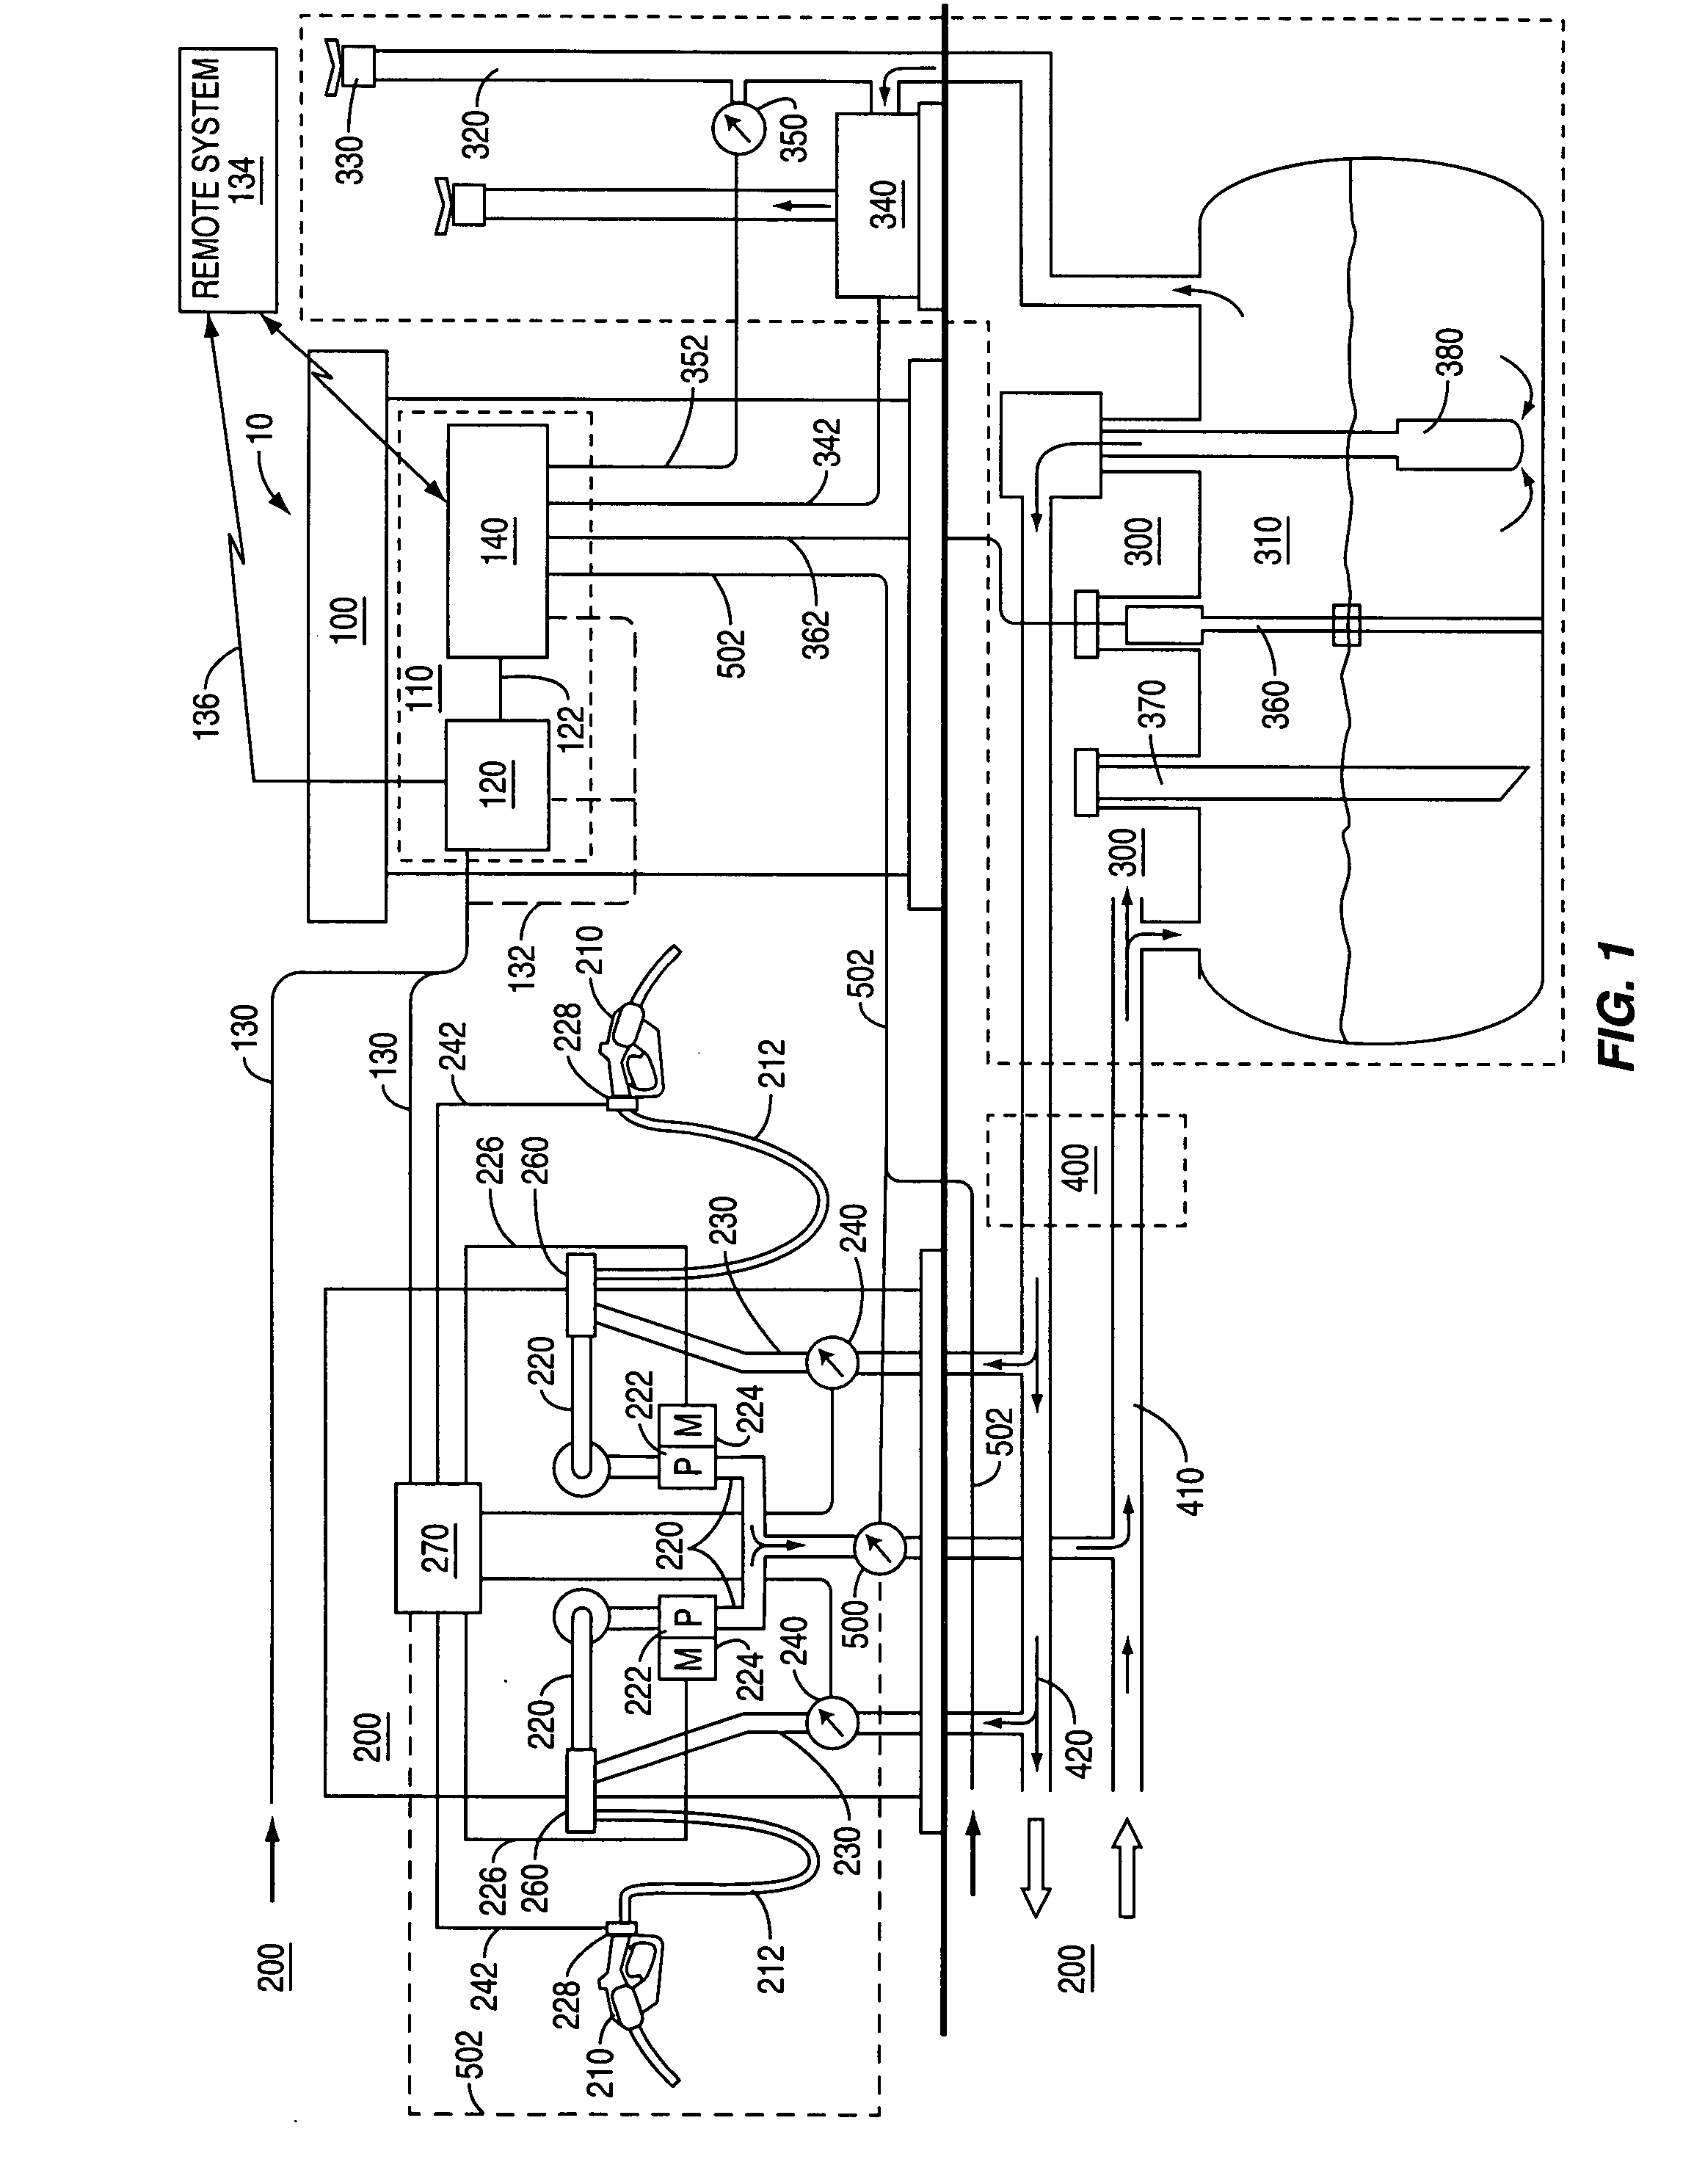 System and method for automatically adjusting an ORVR compatible stage II vapor recovery system to maintain a desired air-to-liquid (A/L) ratio